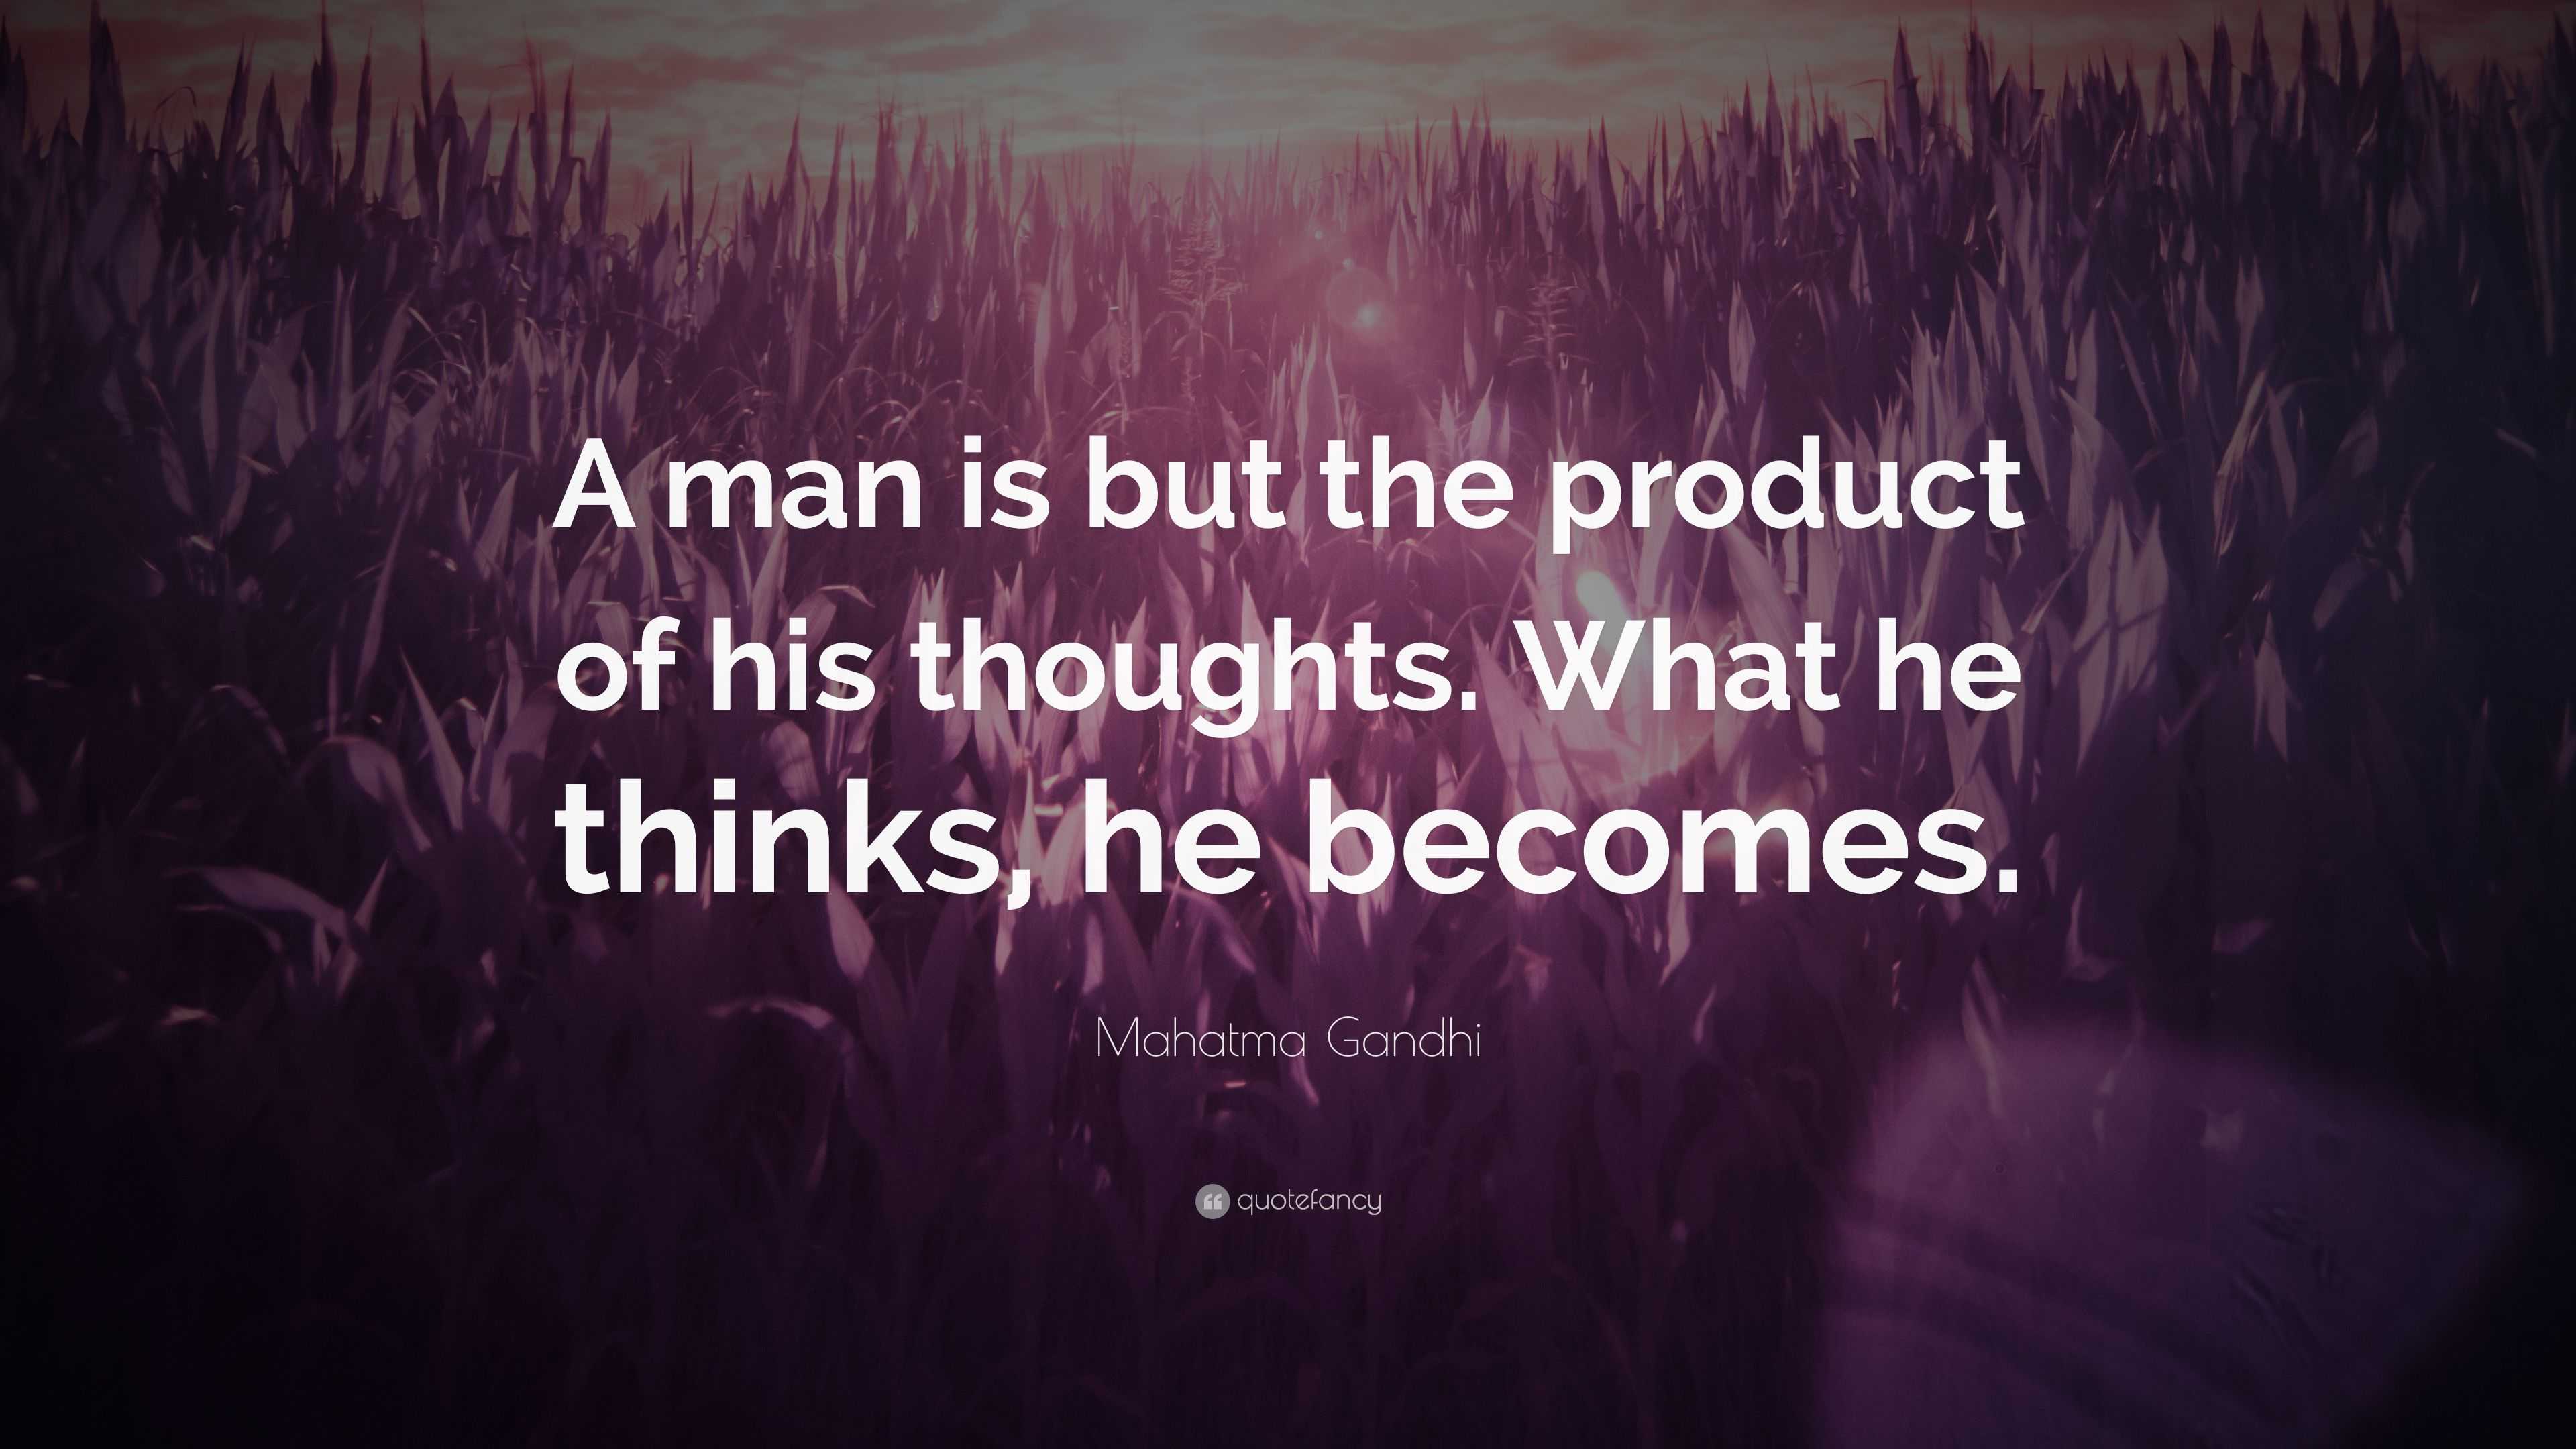 Mahatma Gandhi Quote “A man is but the product of his thoughts What